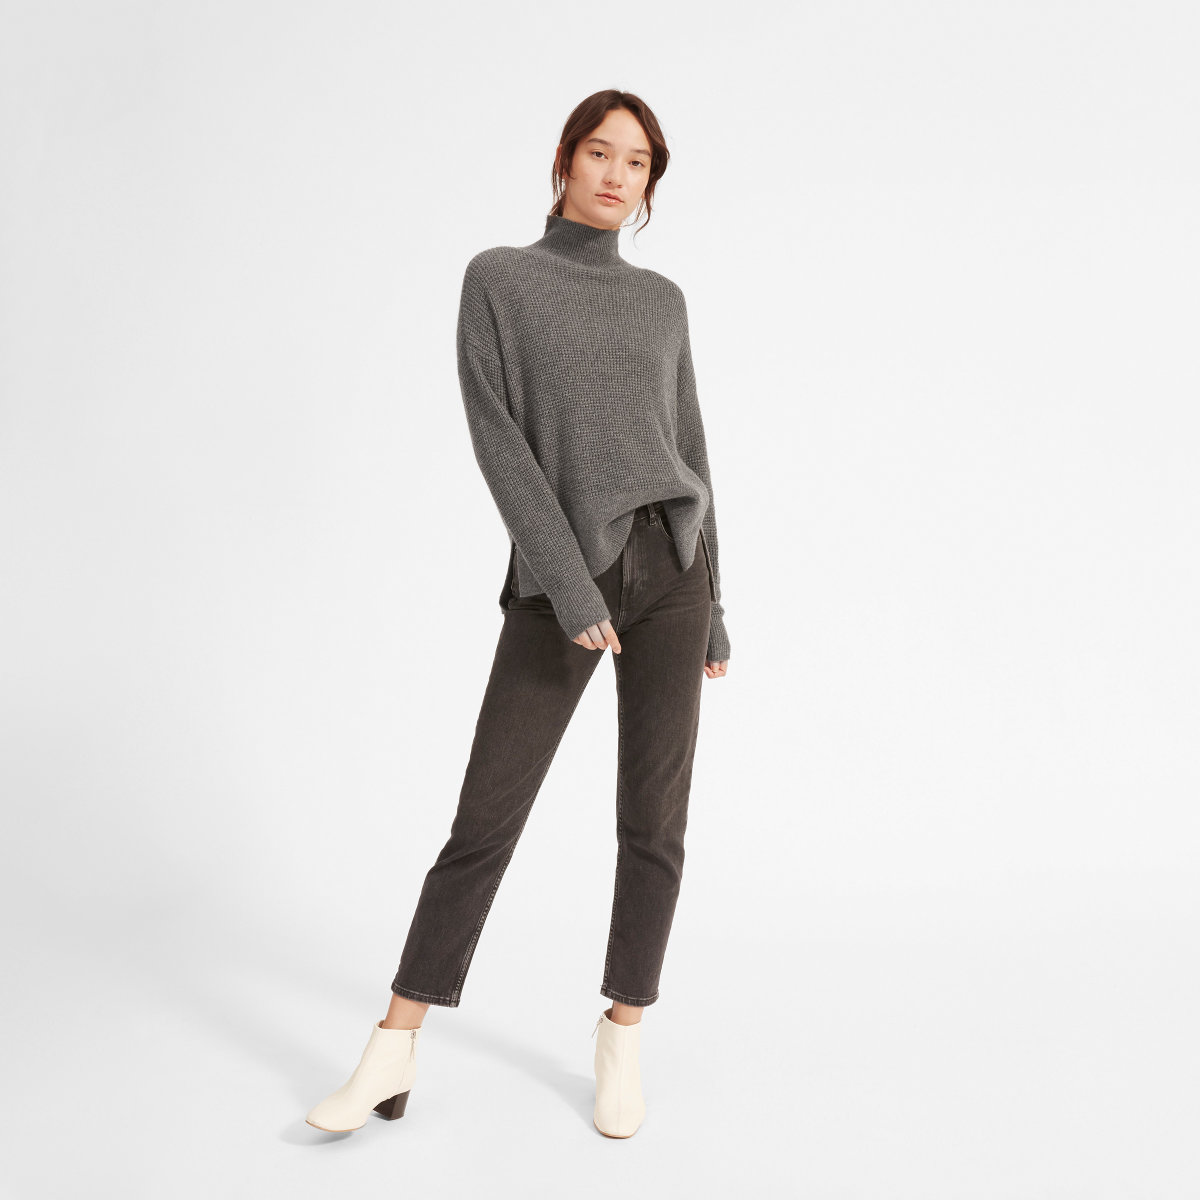 How to Style Basic Sweater Outfit This Fall – Ferbena.com